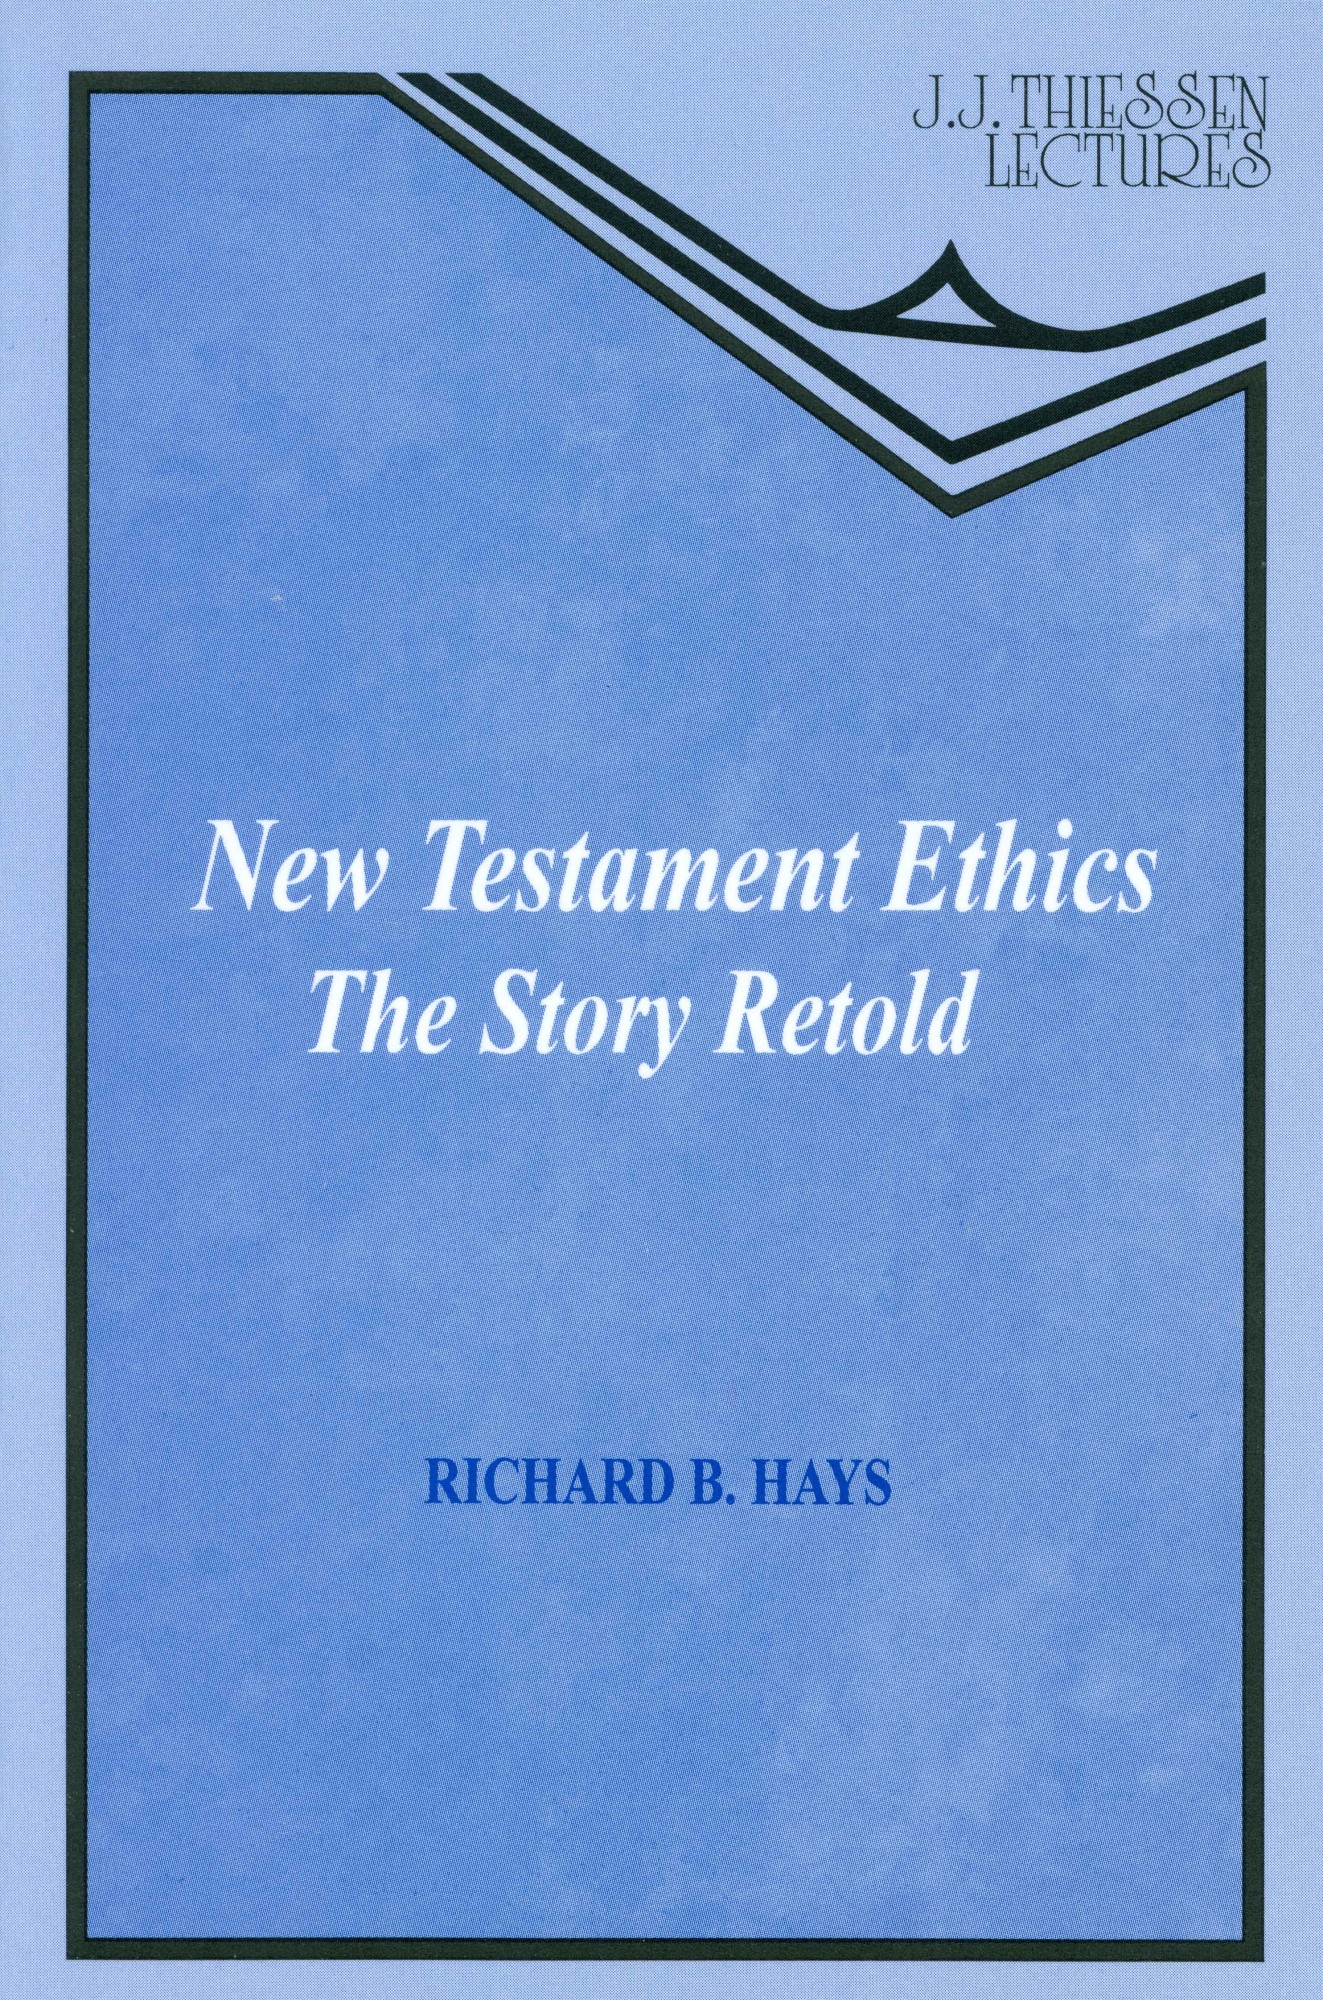 New Testament Ethics: The Story Retold